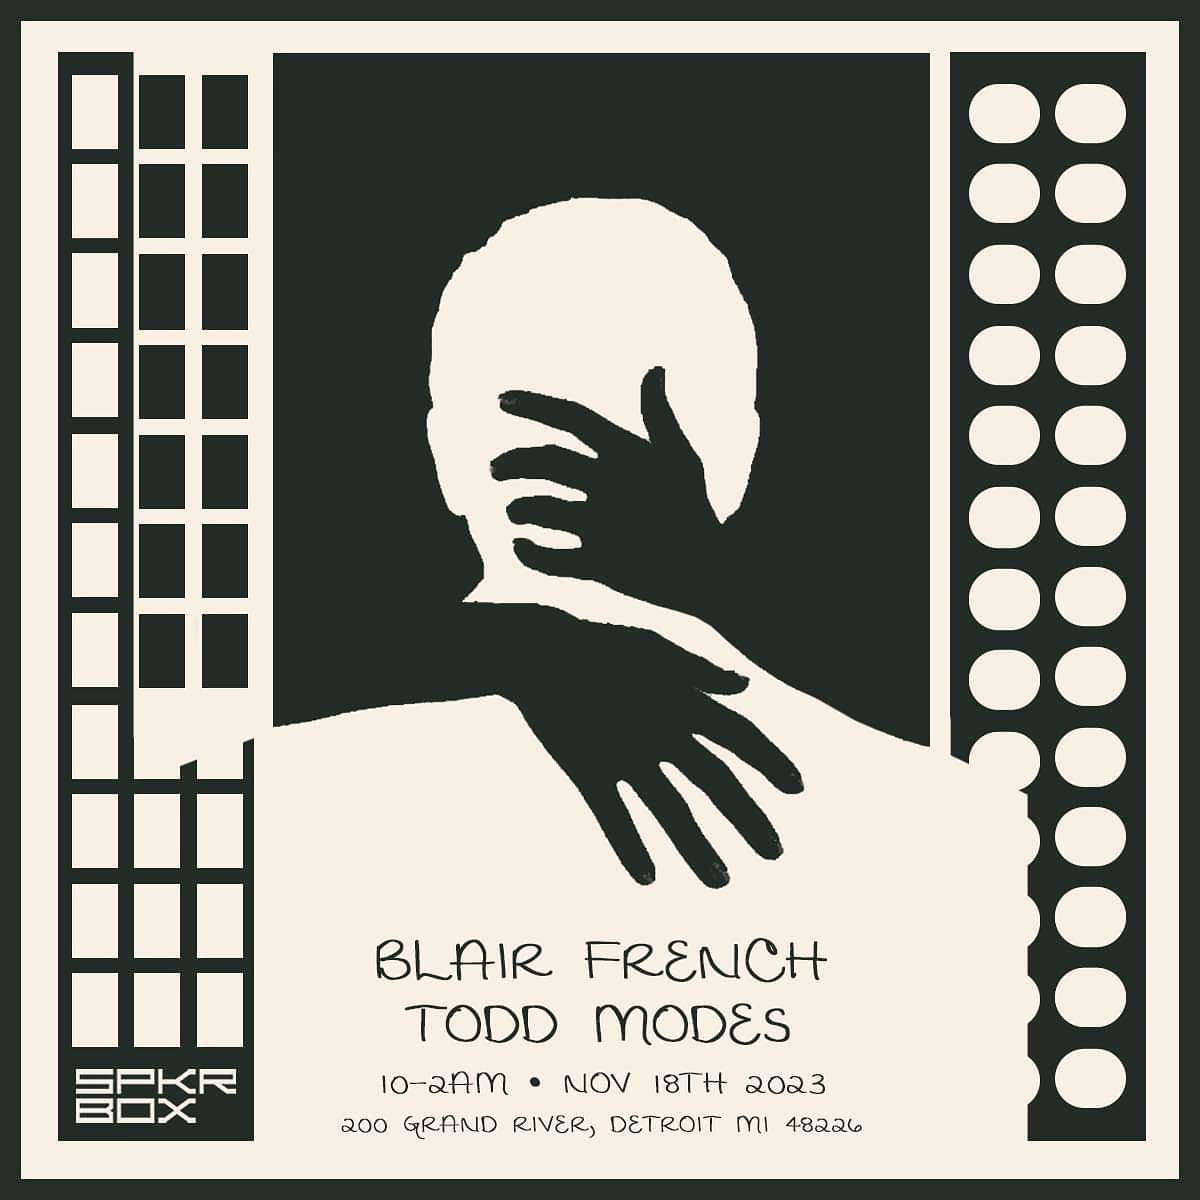 Blair French & Todd Modes - フライヤー表